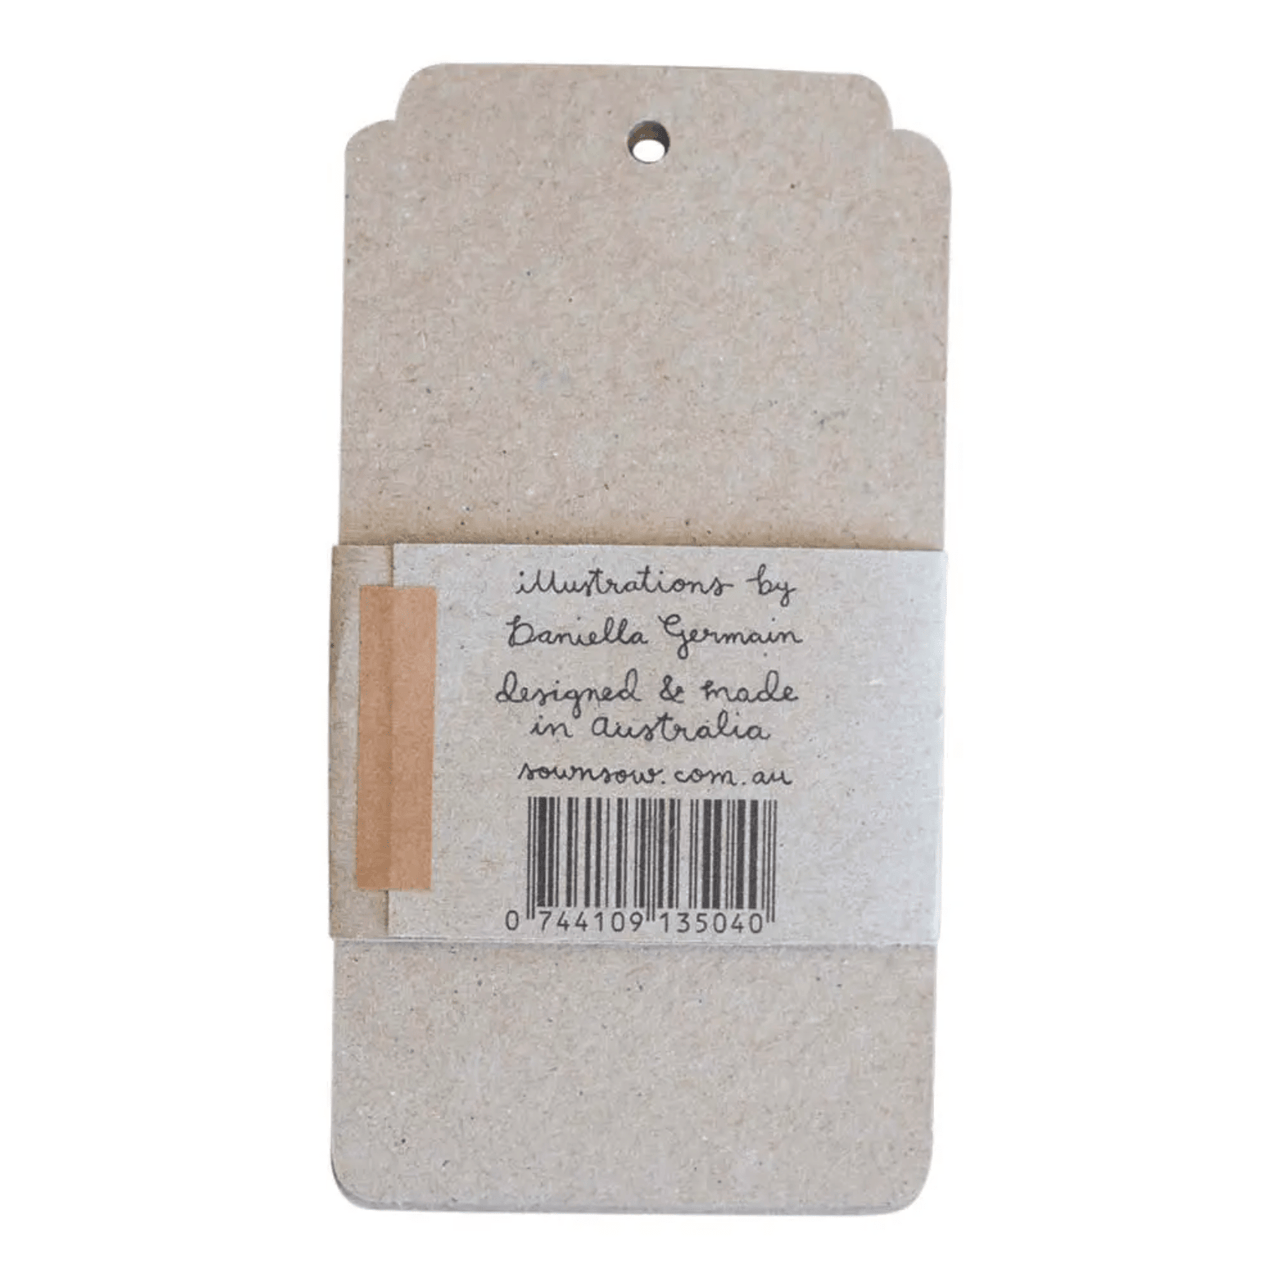 A brown paper gift tag with a Sunflower label on it by Sow n Sow.